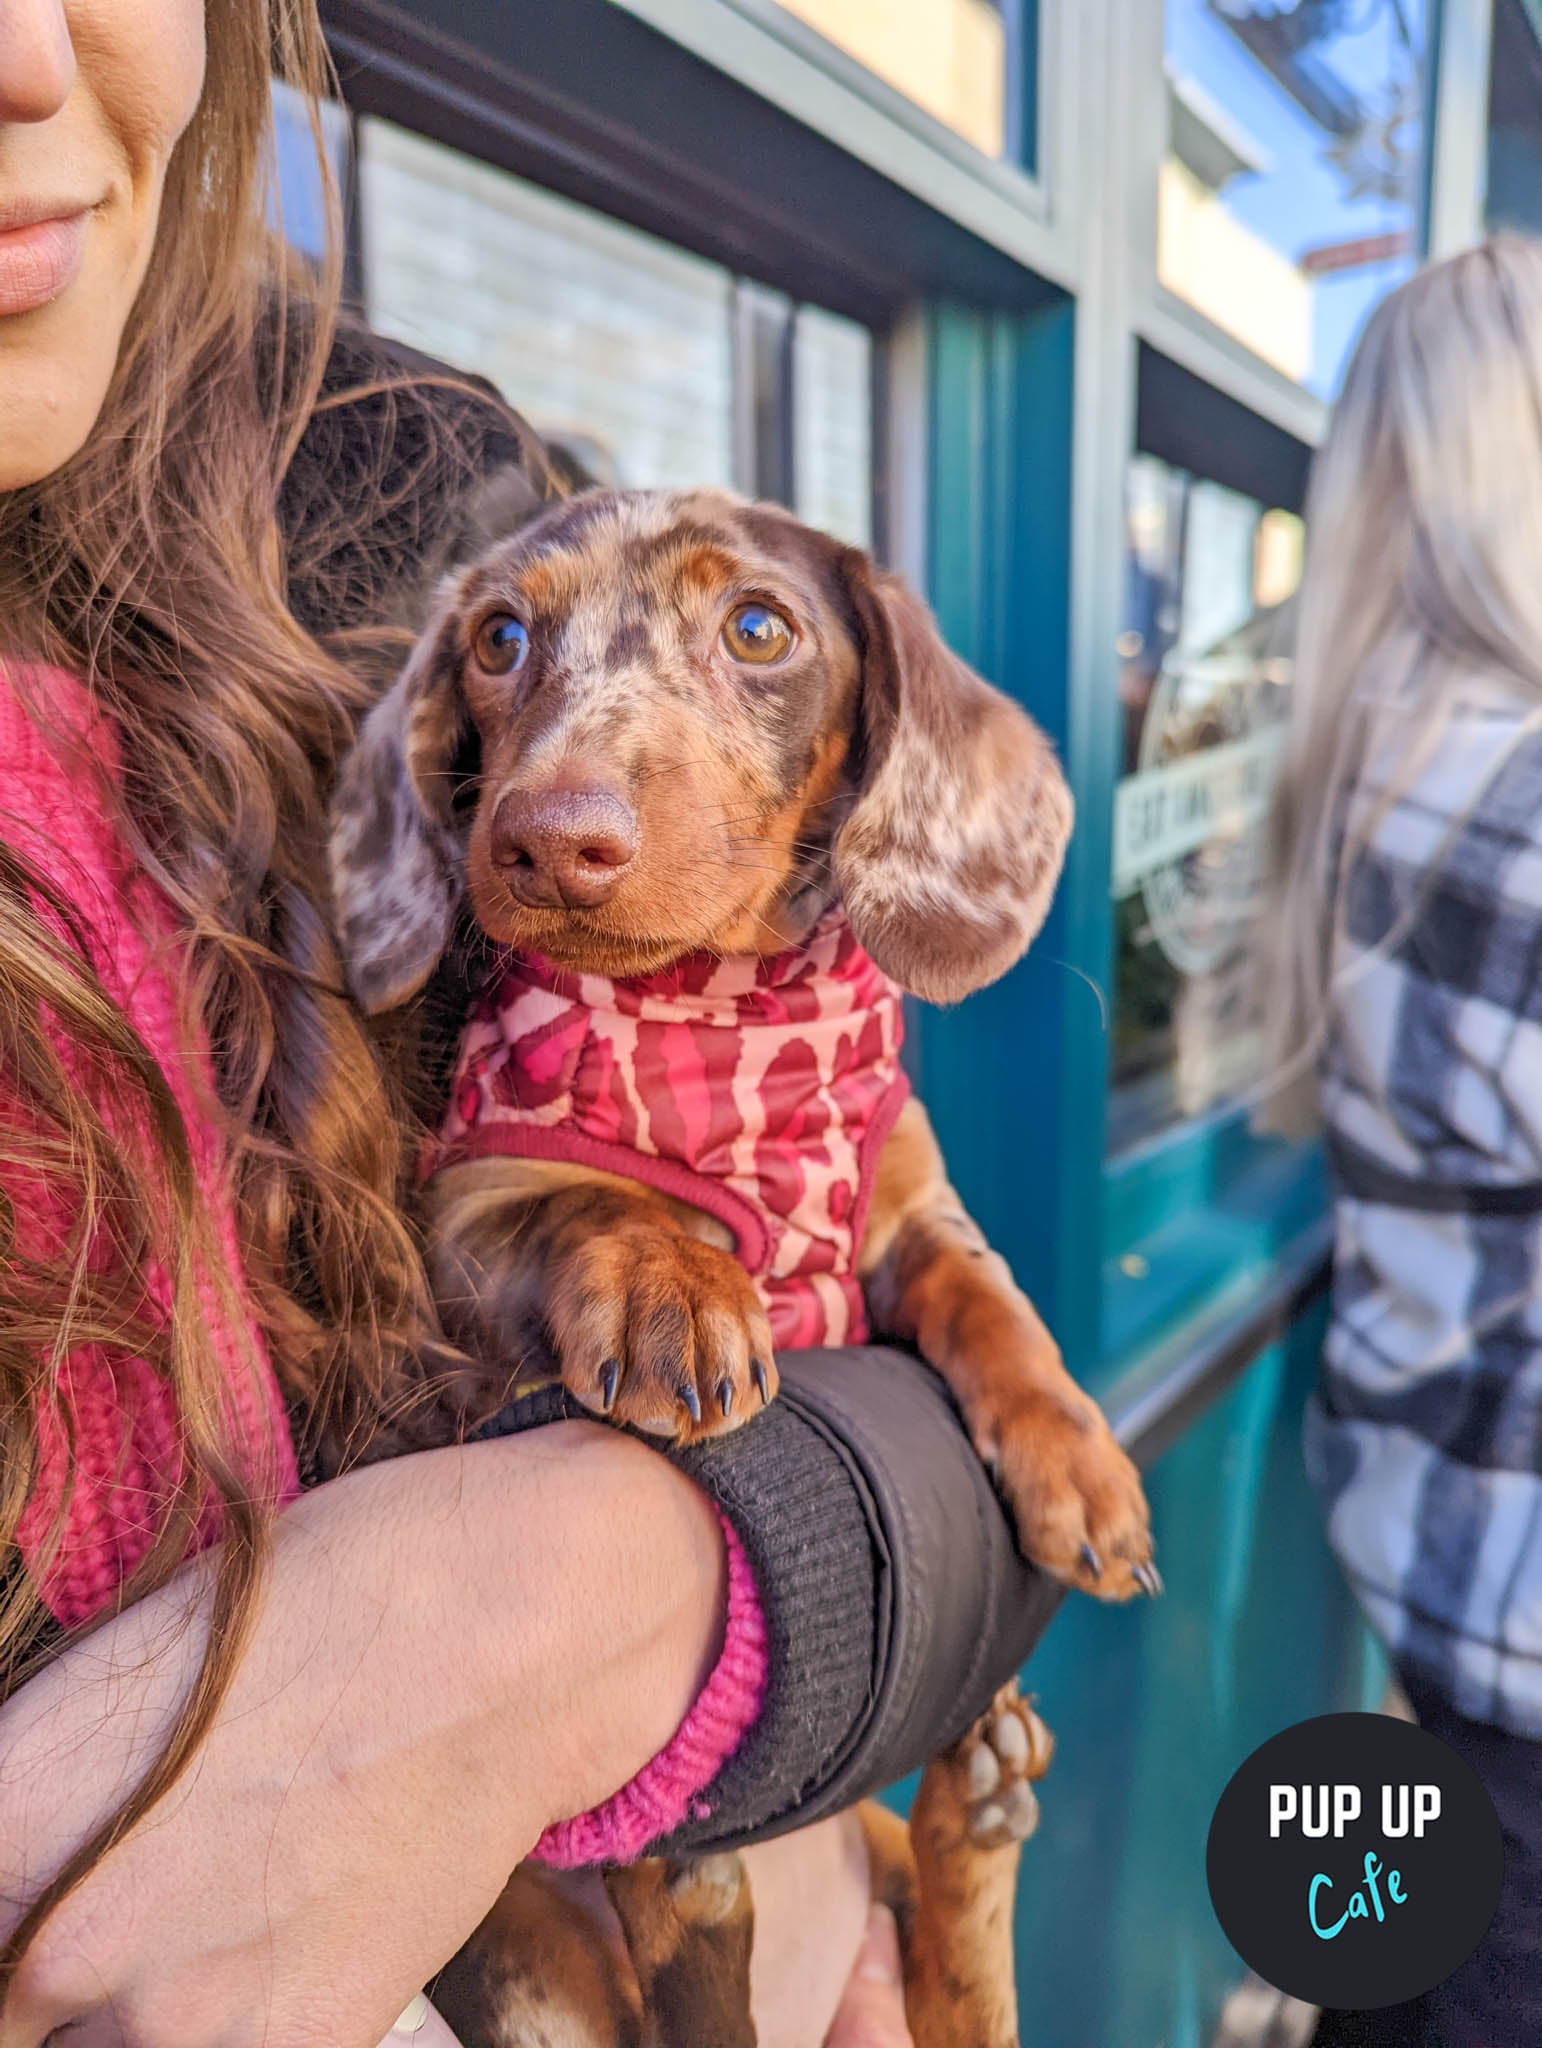 One of the sausage dogs attends the Pup Up Cafe wearing a red coat